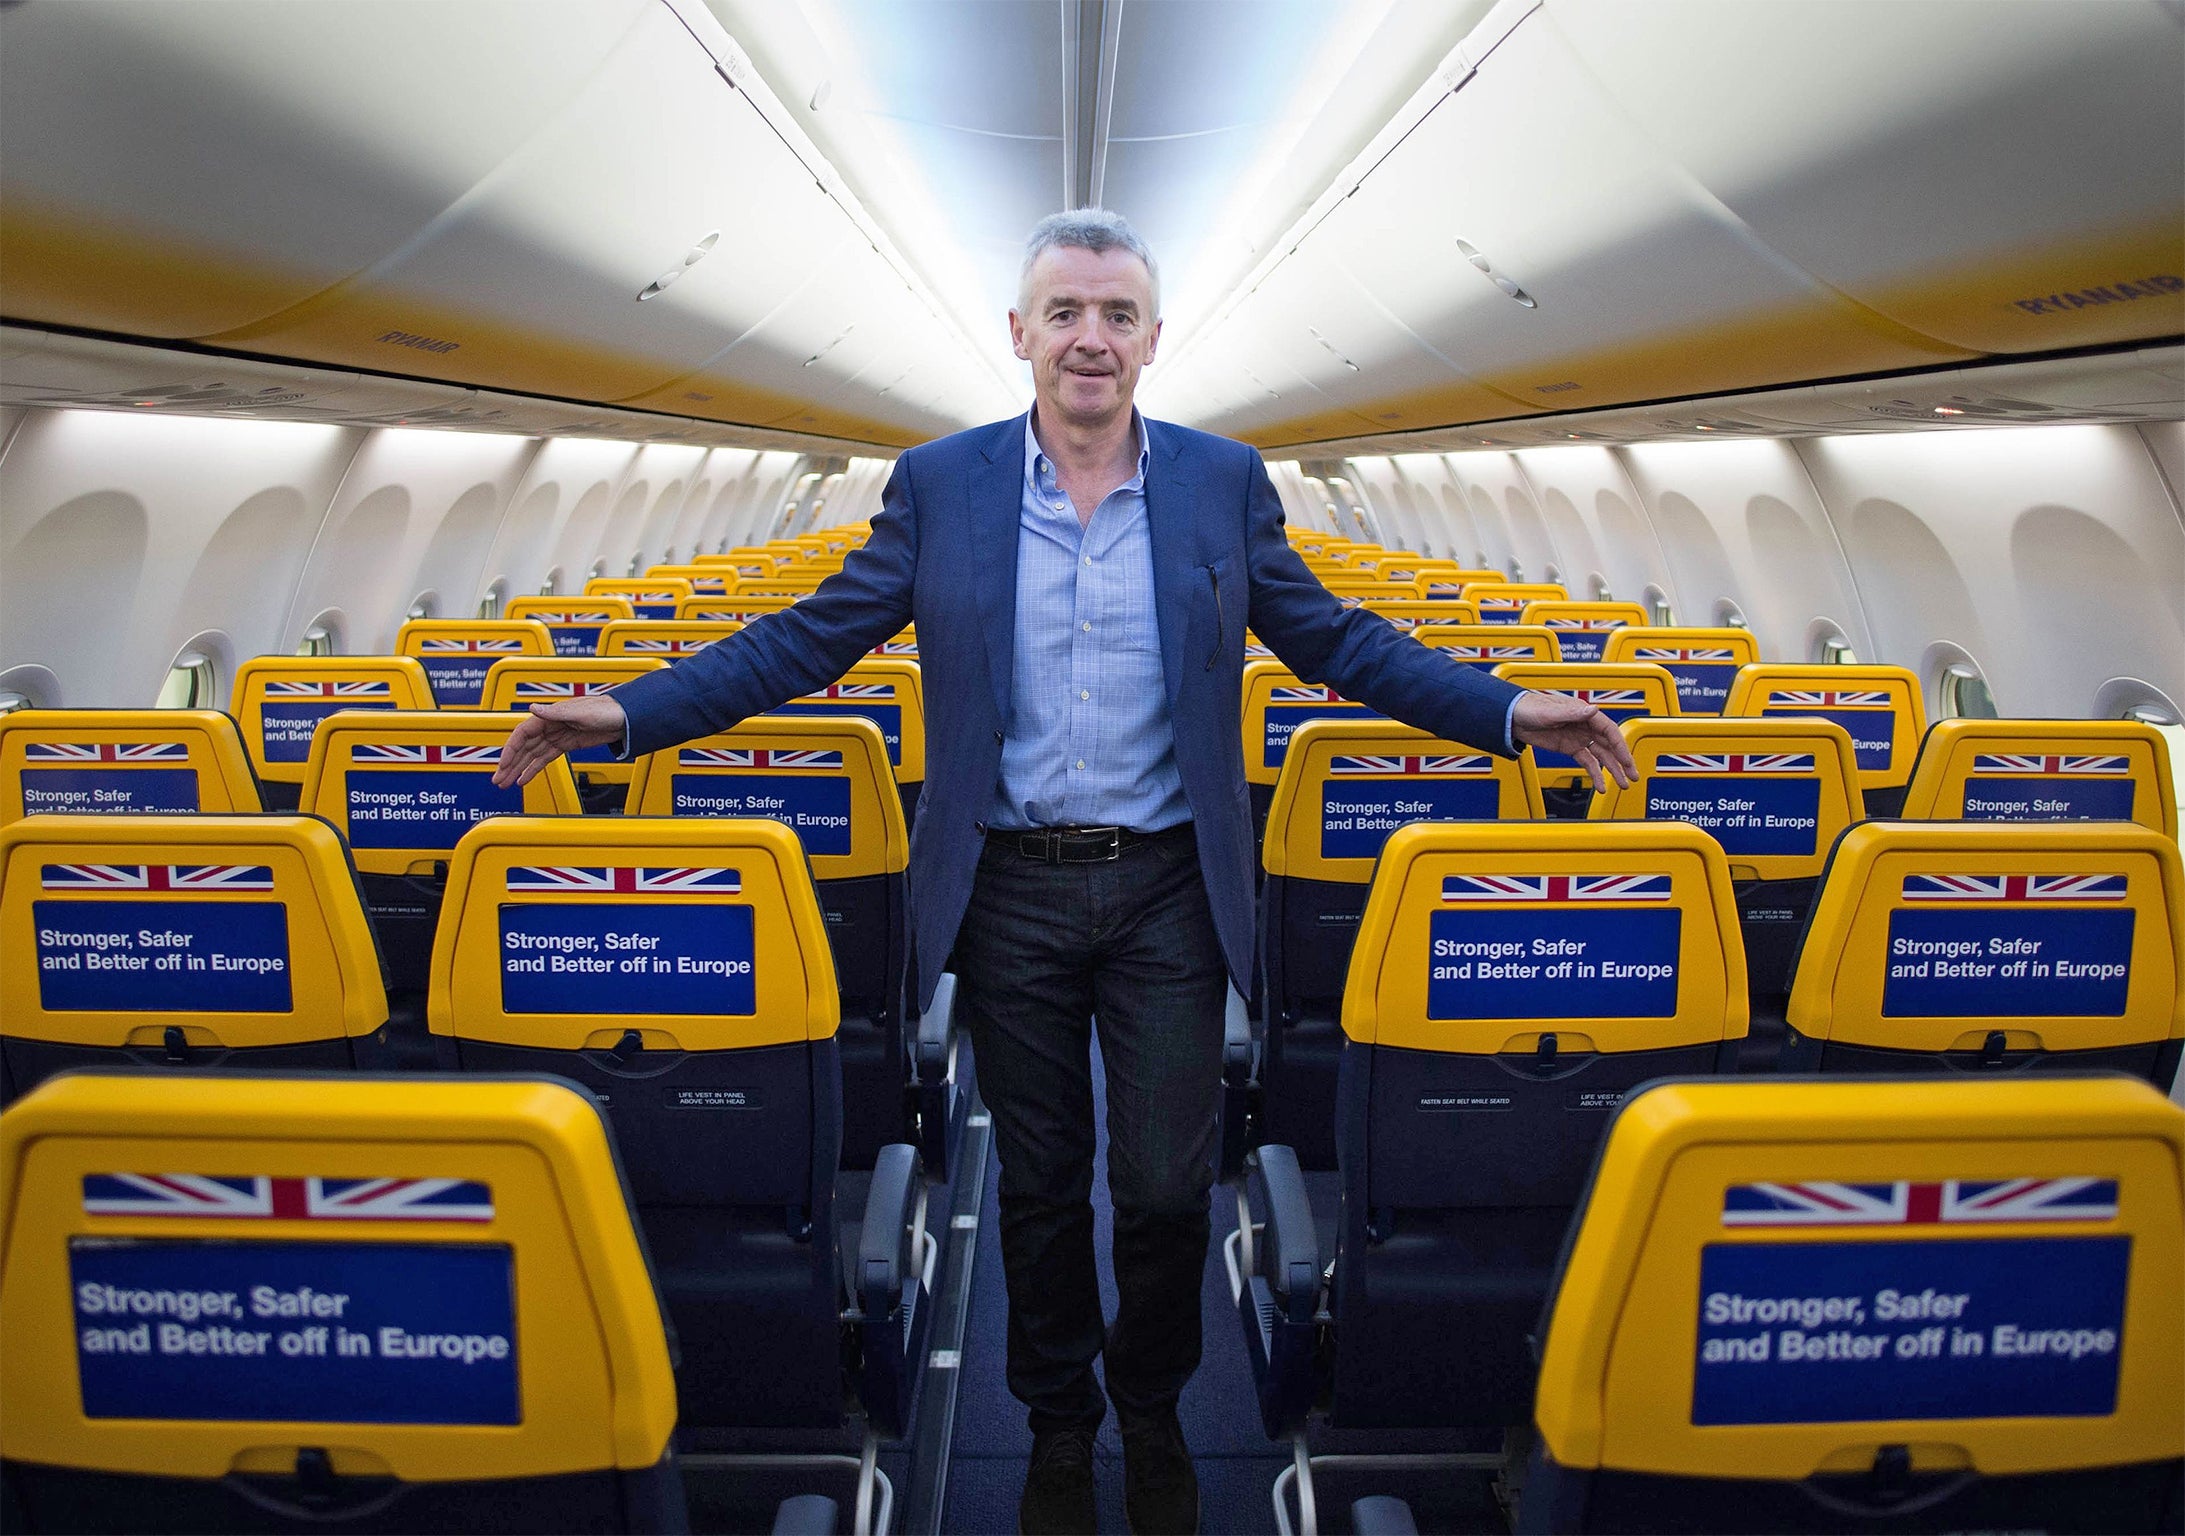 In the run-up to the Referendum, Michael O'leary plastered pro-EU slogans on the seats of Ryanair's fleet